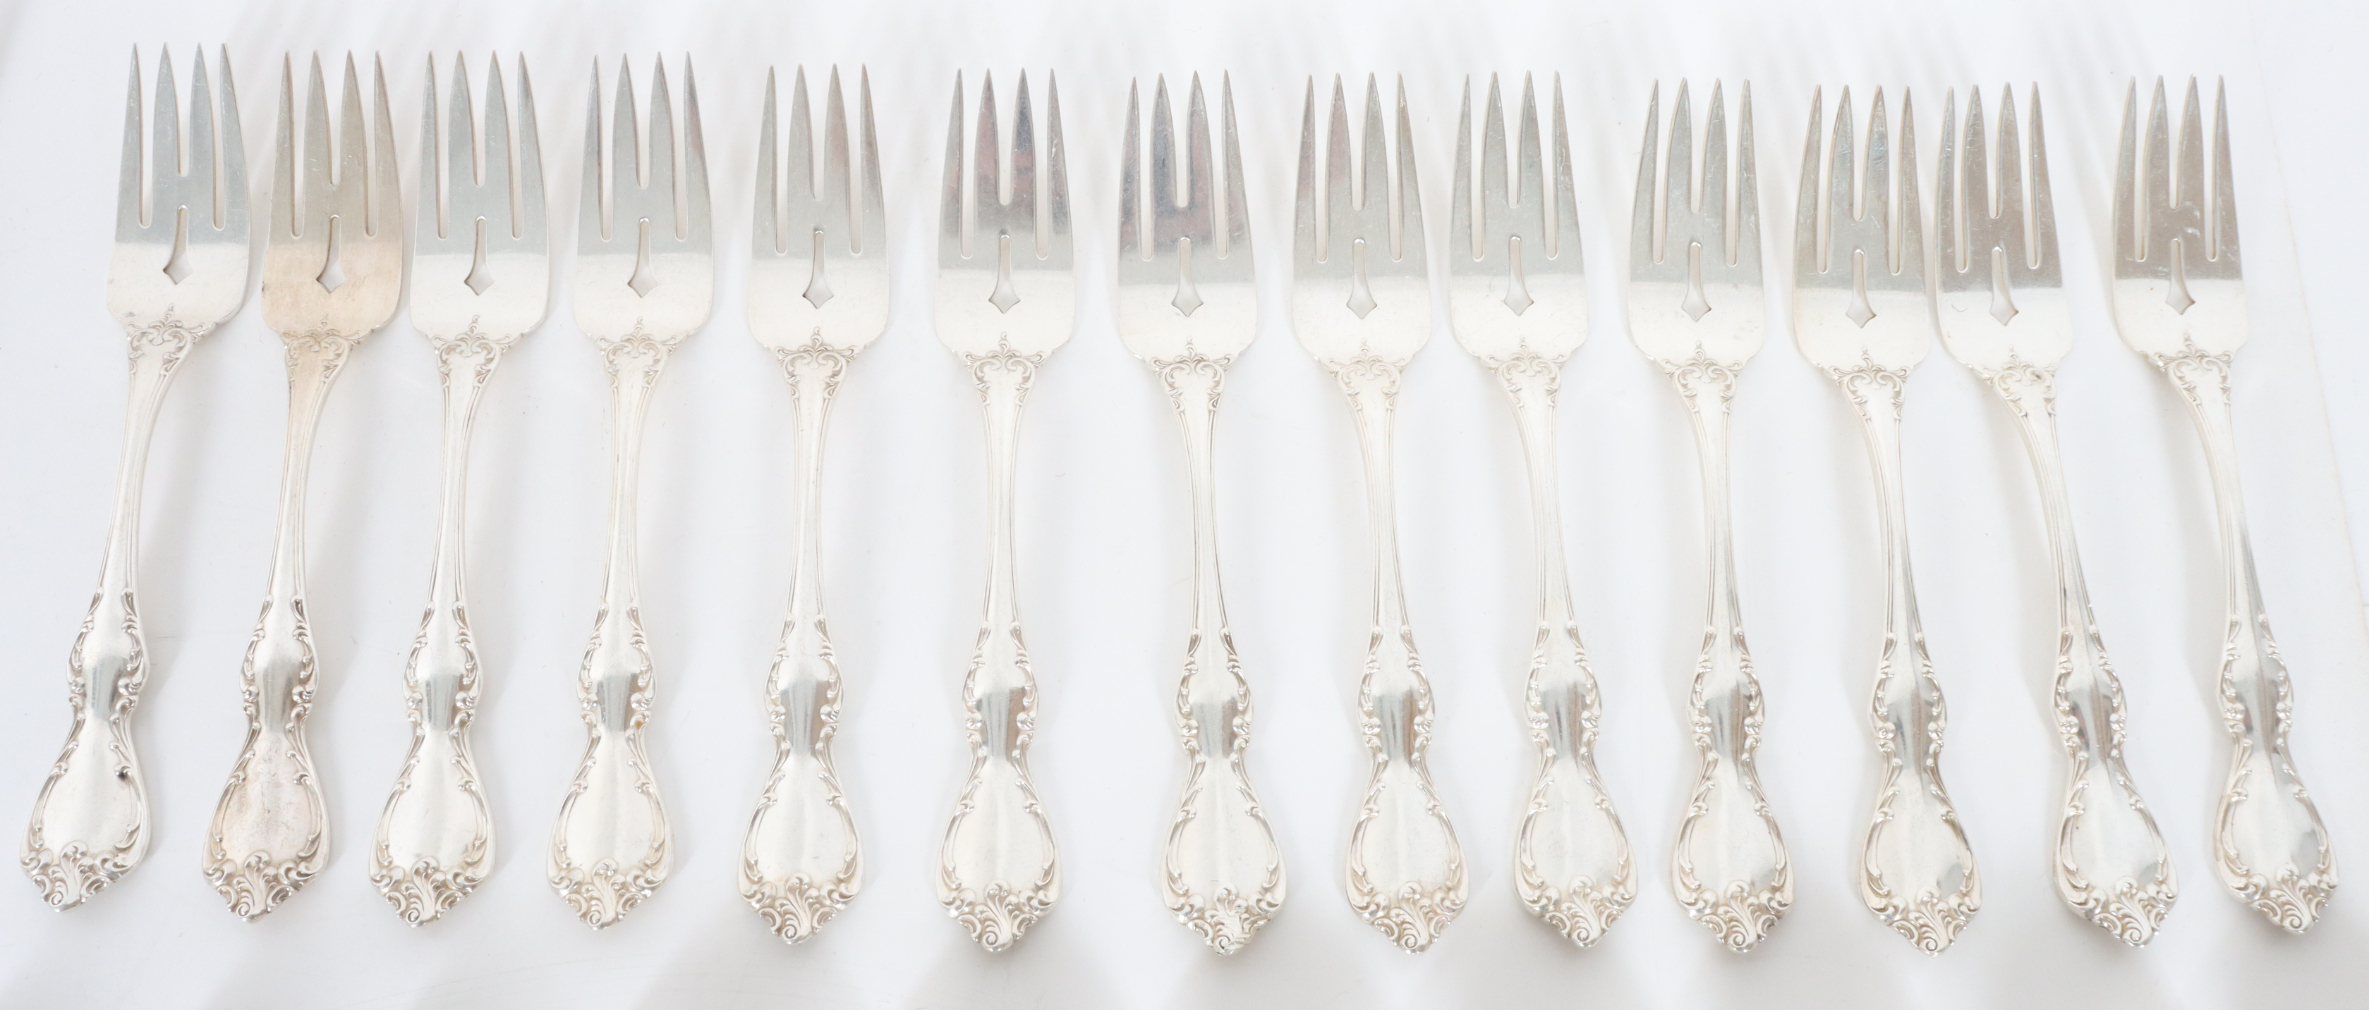 (51) Pc 1959 Towle Sterling Silverware Set, 81 OZT - Image 3 of 11